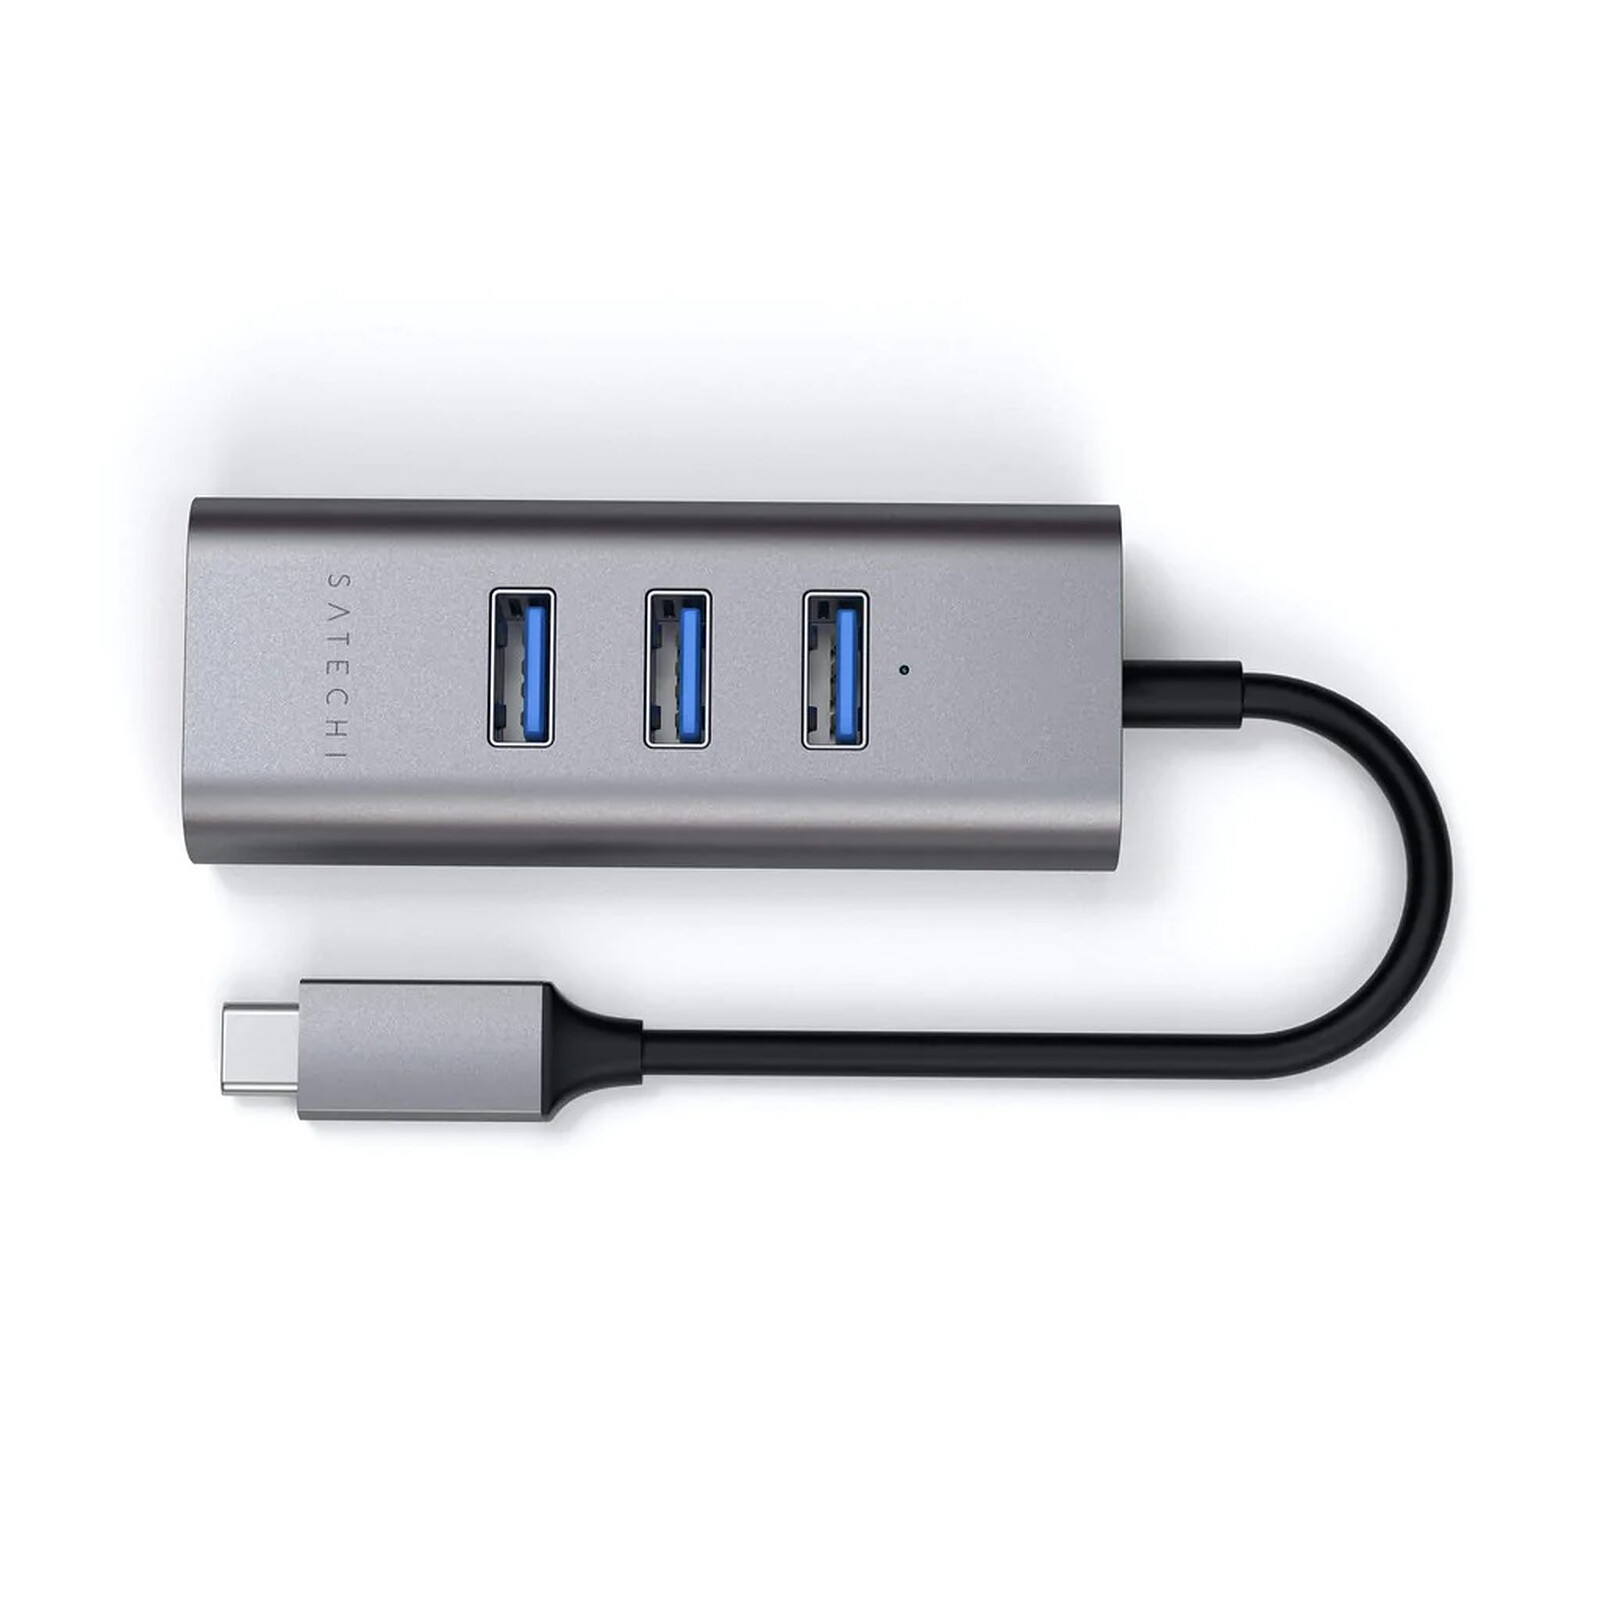 SATECHI 2-in-1 USB-C 3 USB 3.0 + Ethernet (Grey) - Network card Satechi on